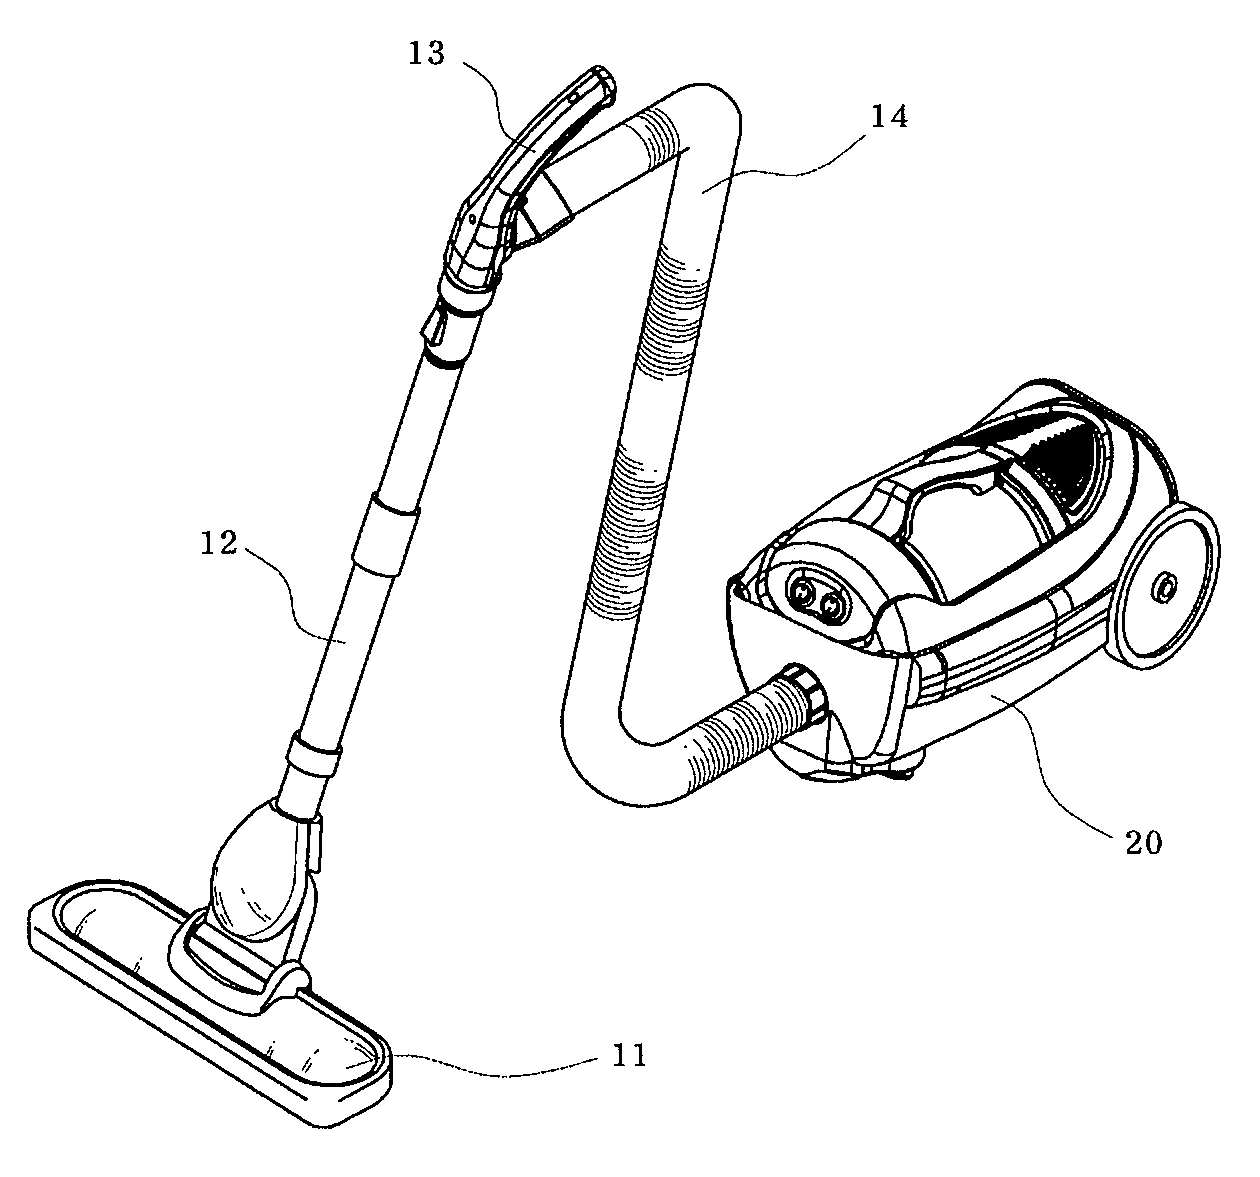 Vacuum cleaner with an integrated handheld vacuum cleaner unit